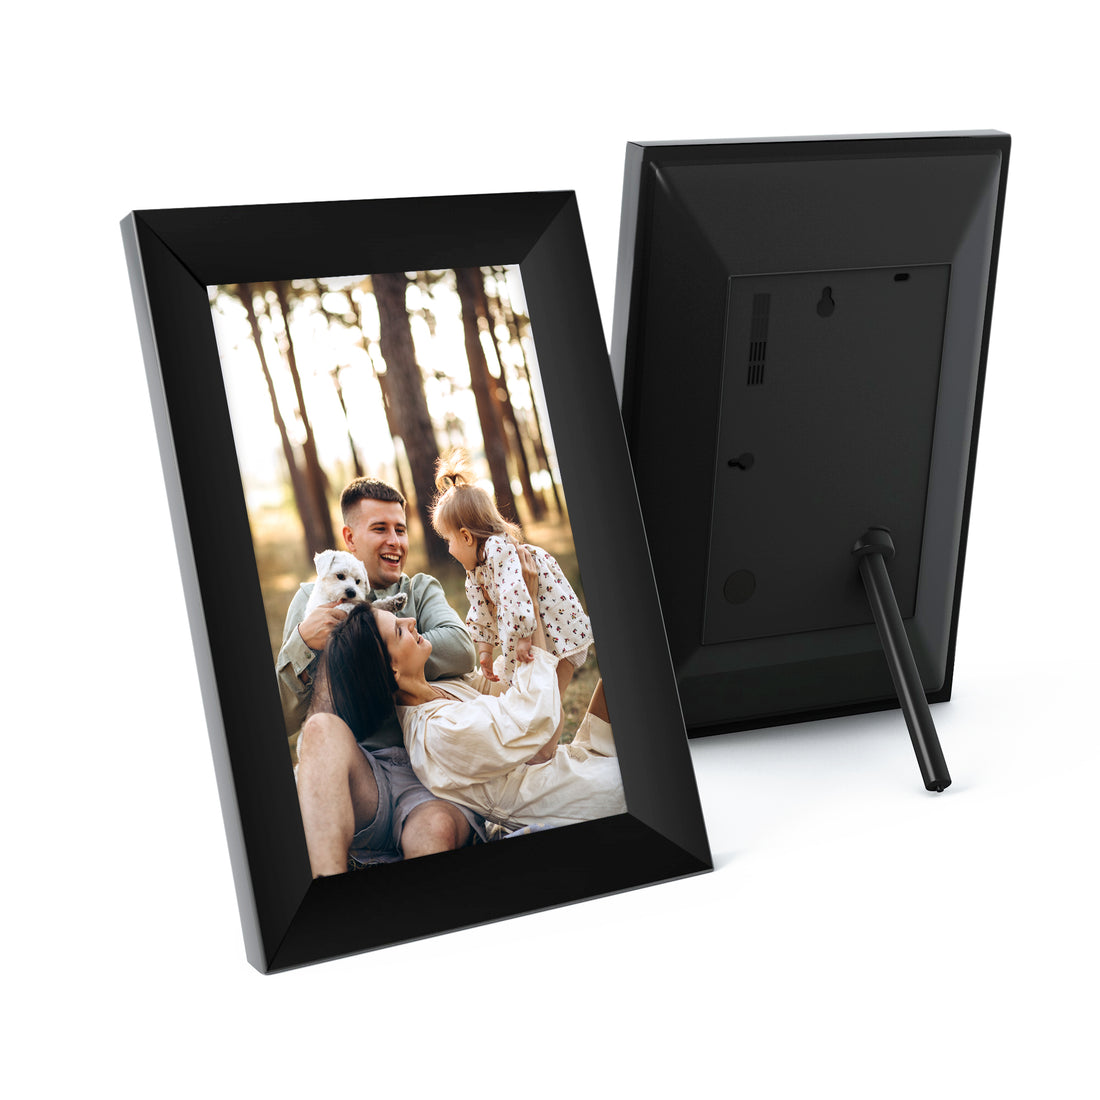 10.1 Inch Smart Touch Screen Electronic Photo Frame for Gifting